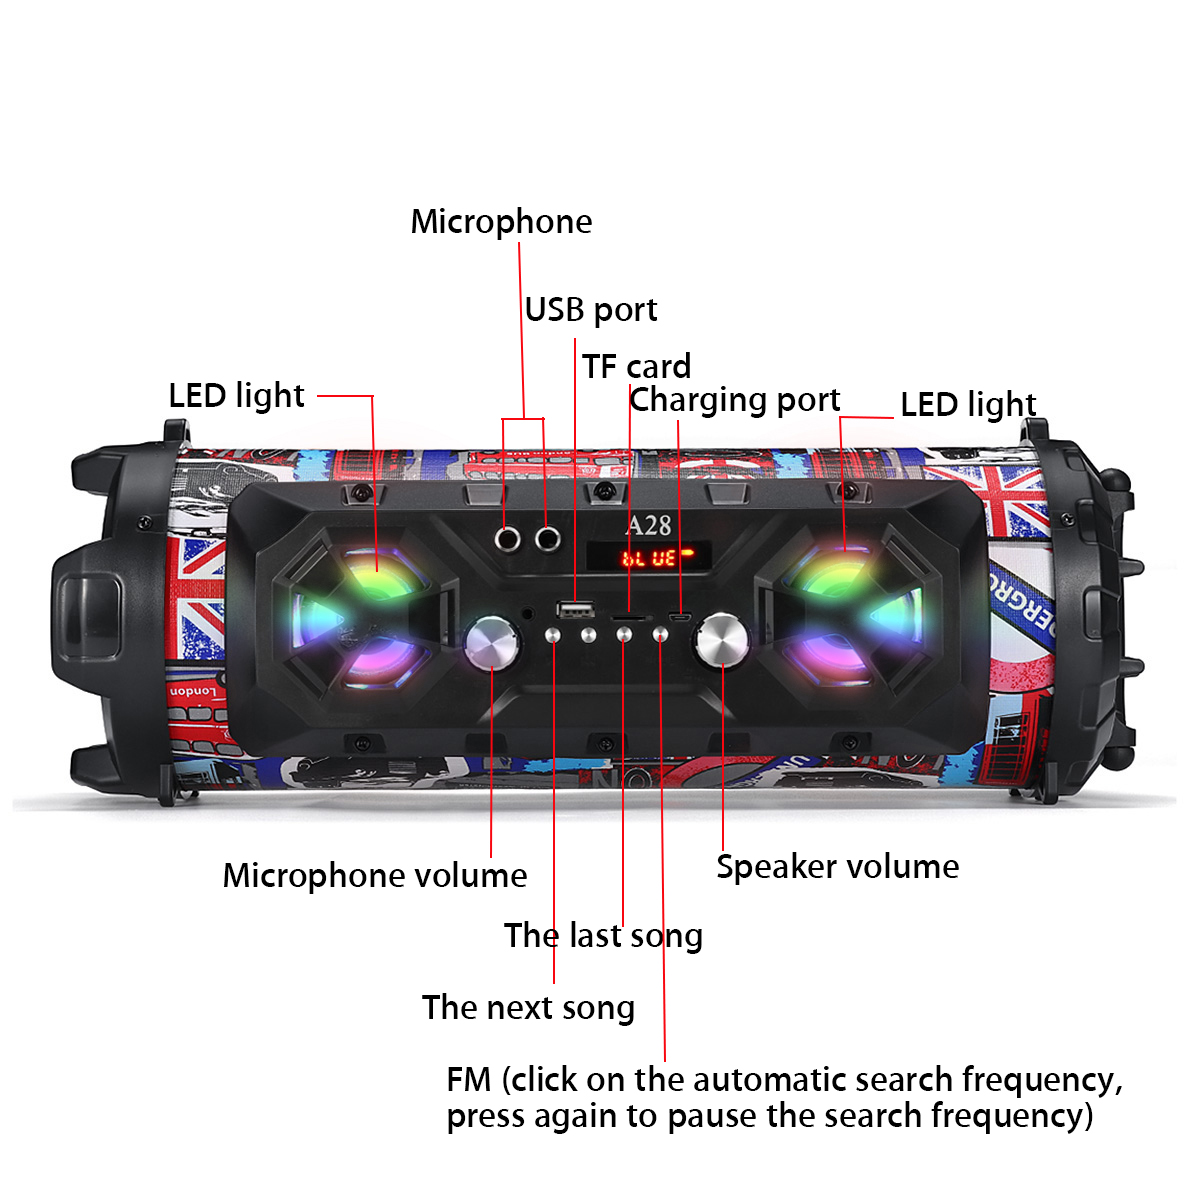 Unique Portable LED Wireless Portable bluetooth 4.2 Speaker Stereo Sound Super Bass HIFI AUX FM Subwoofer Loudspeaker ,RGB Colorful Lights, EQ, Booming Bass, Outdoor Speaker for Home, Party, Camping - image 5 of 8